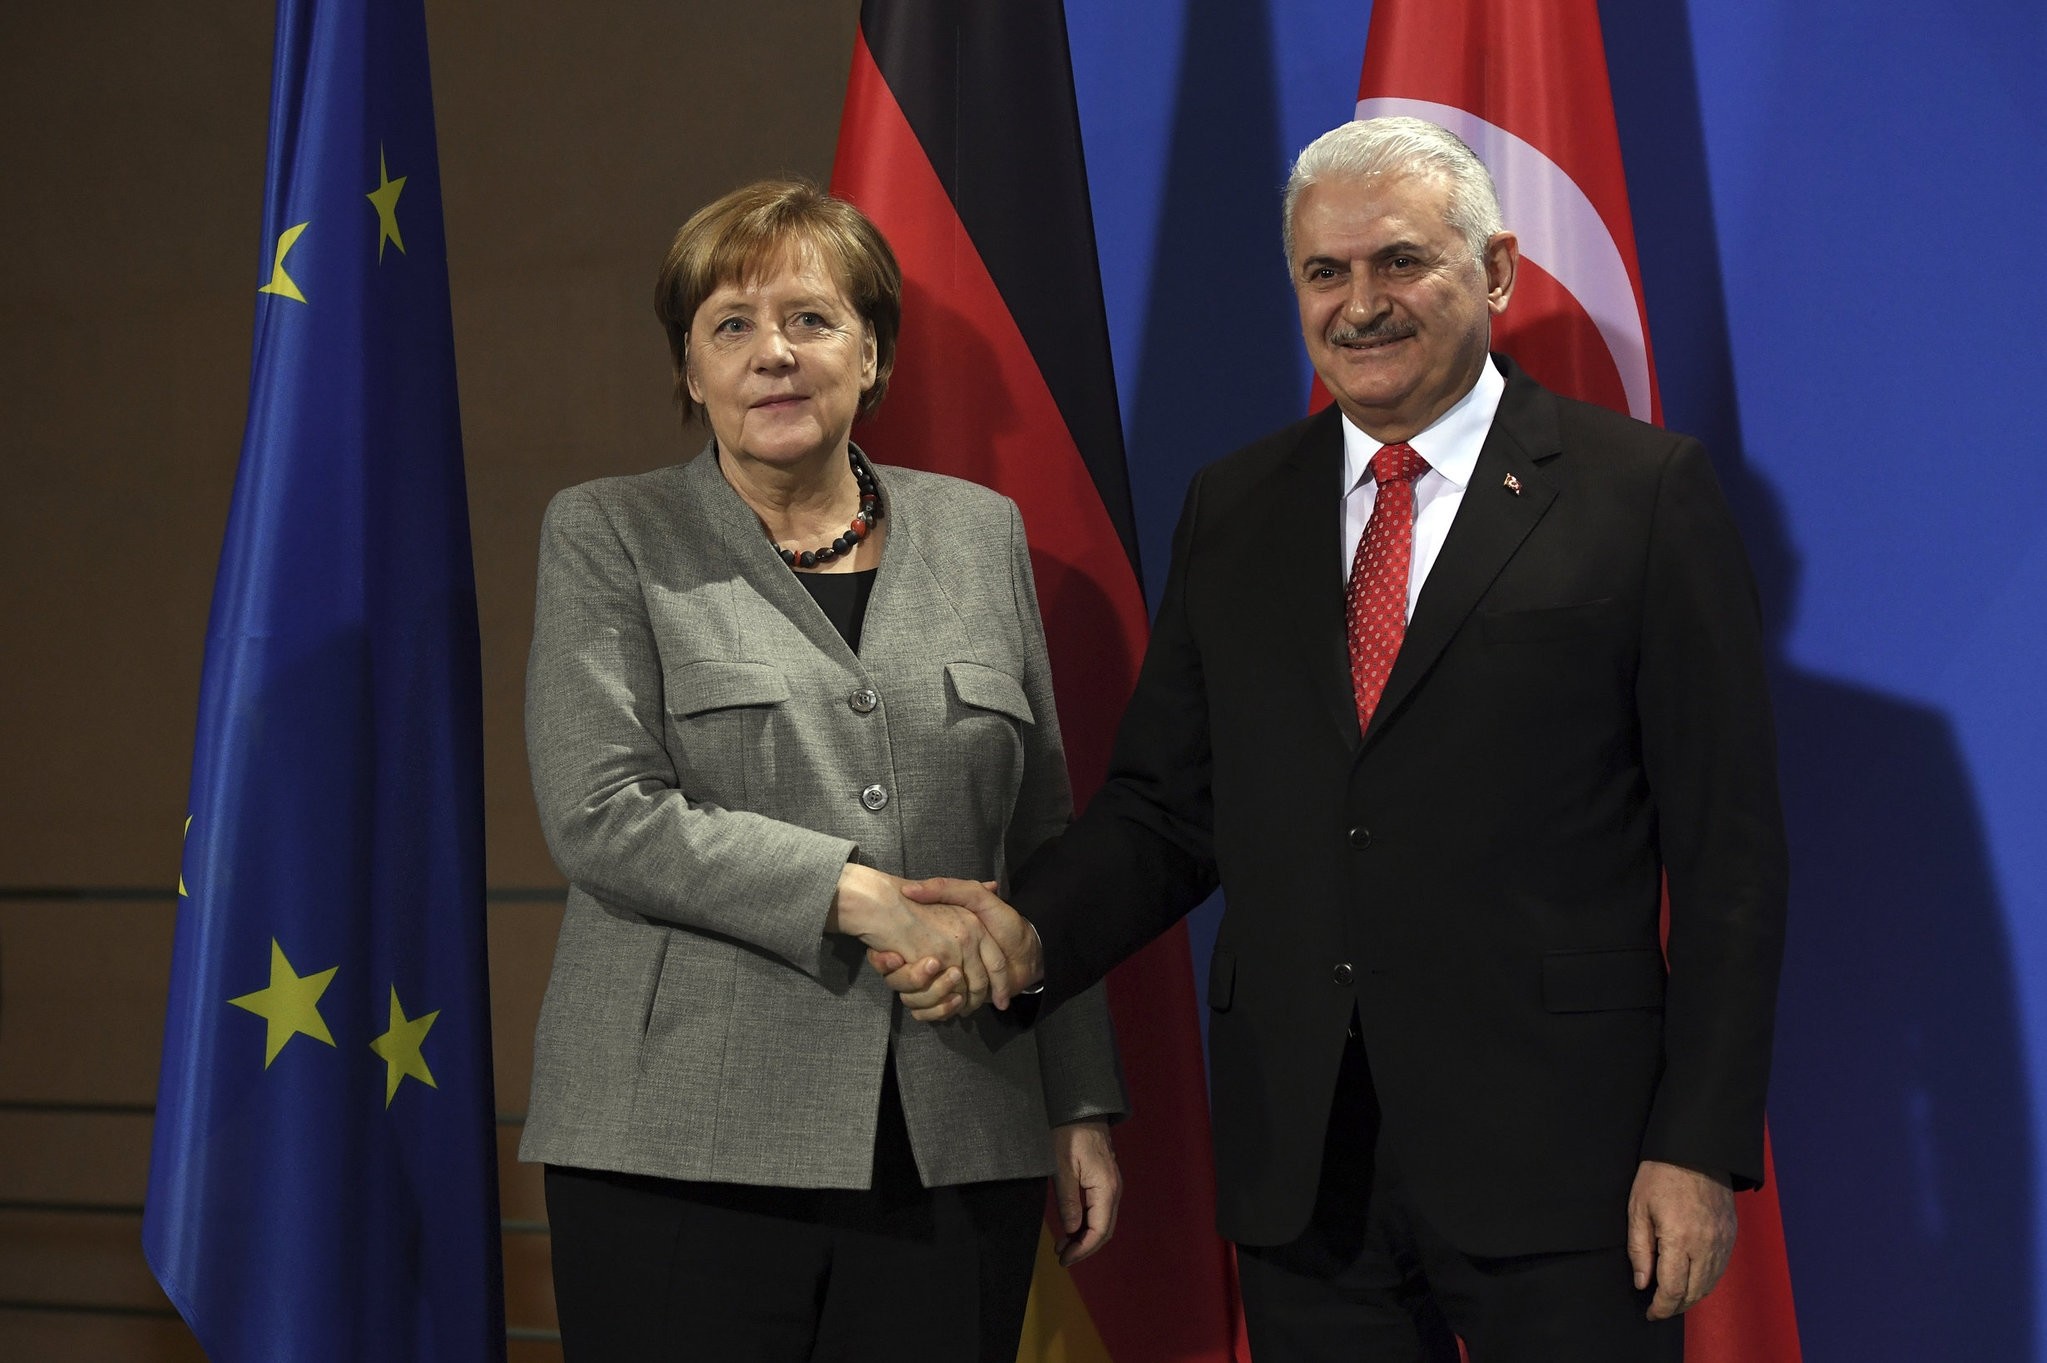 German Chancellor Merkel and Prime Minister Yu0131ldu0131ru0131m shake hands during a press conference in the Chancellery, Berlin, Feb. 15. 